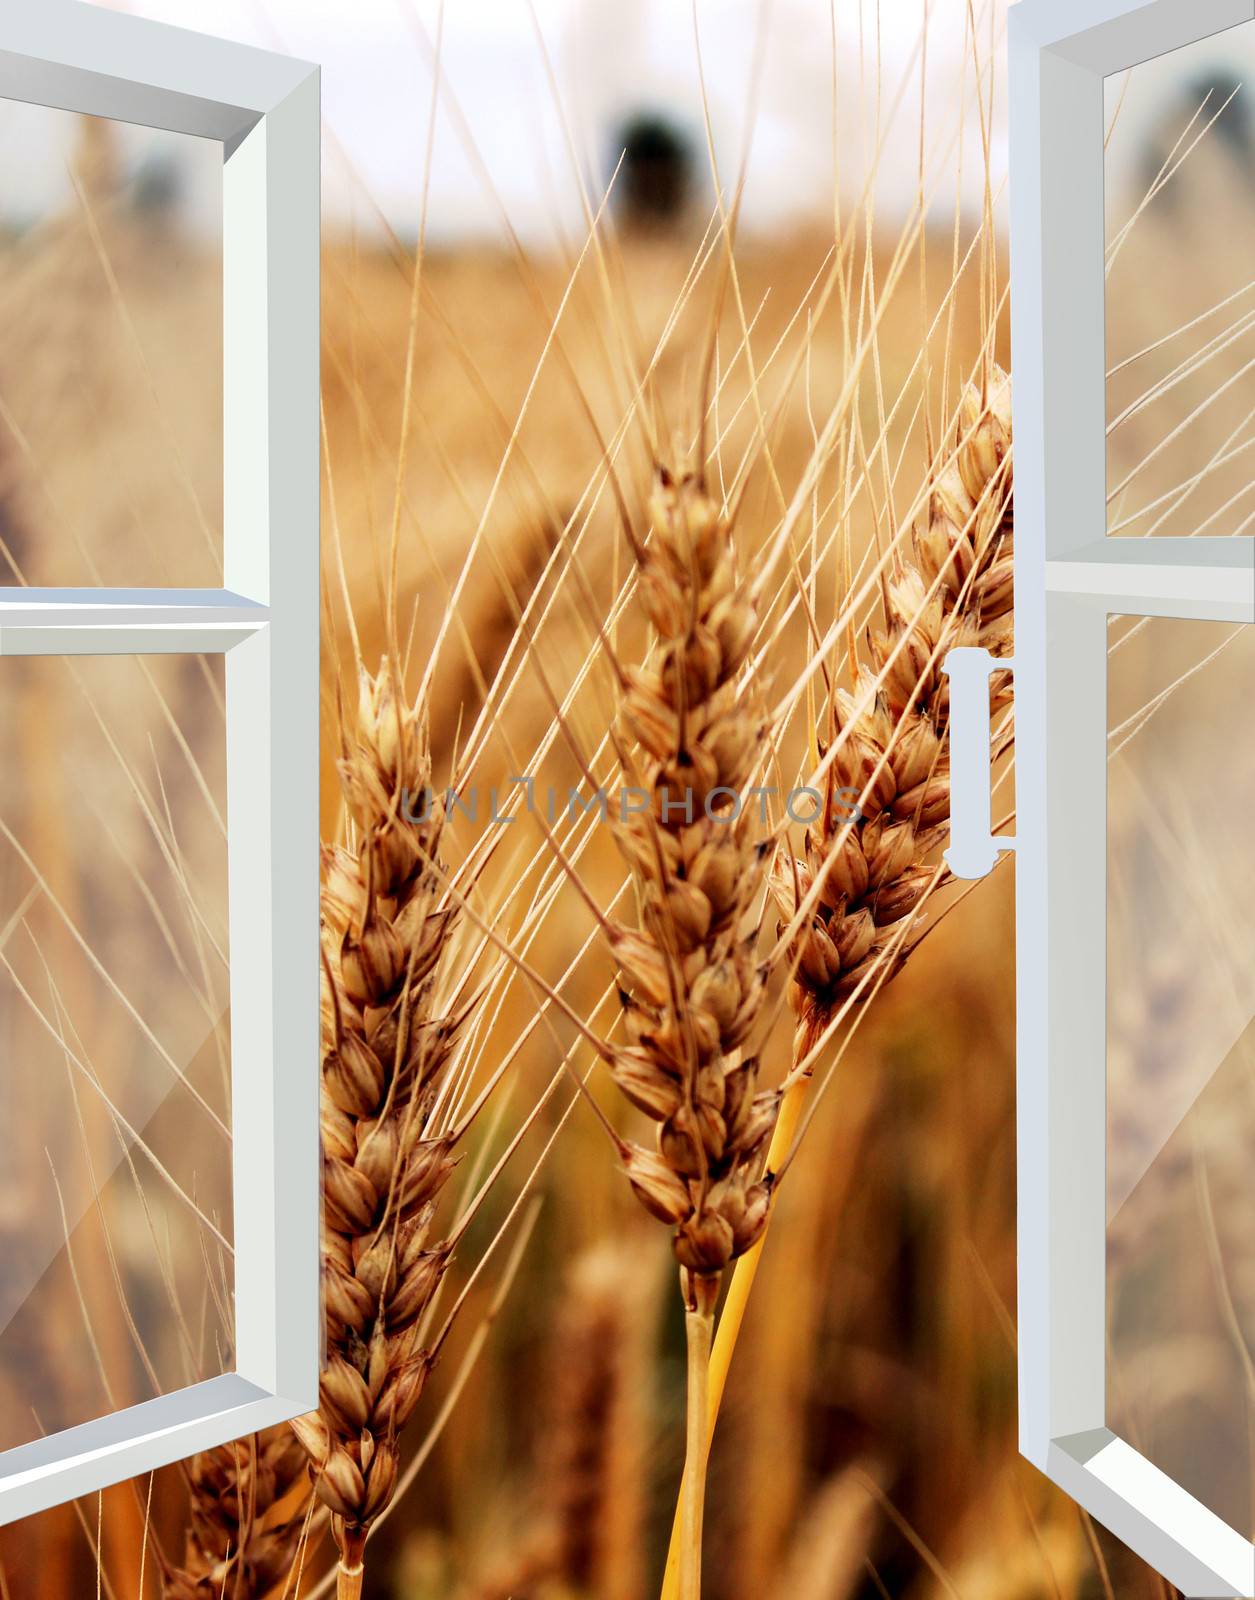 opened window to the field of wheat by alexmak